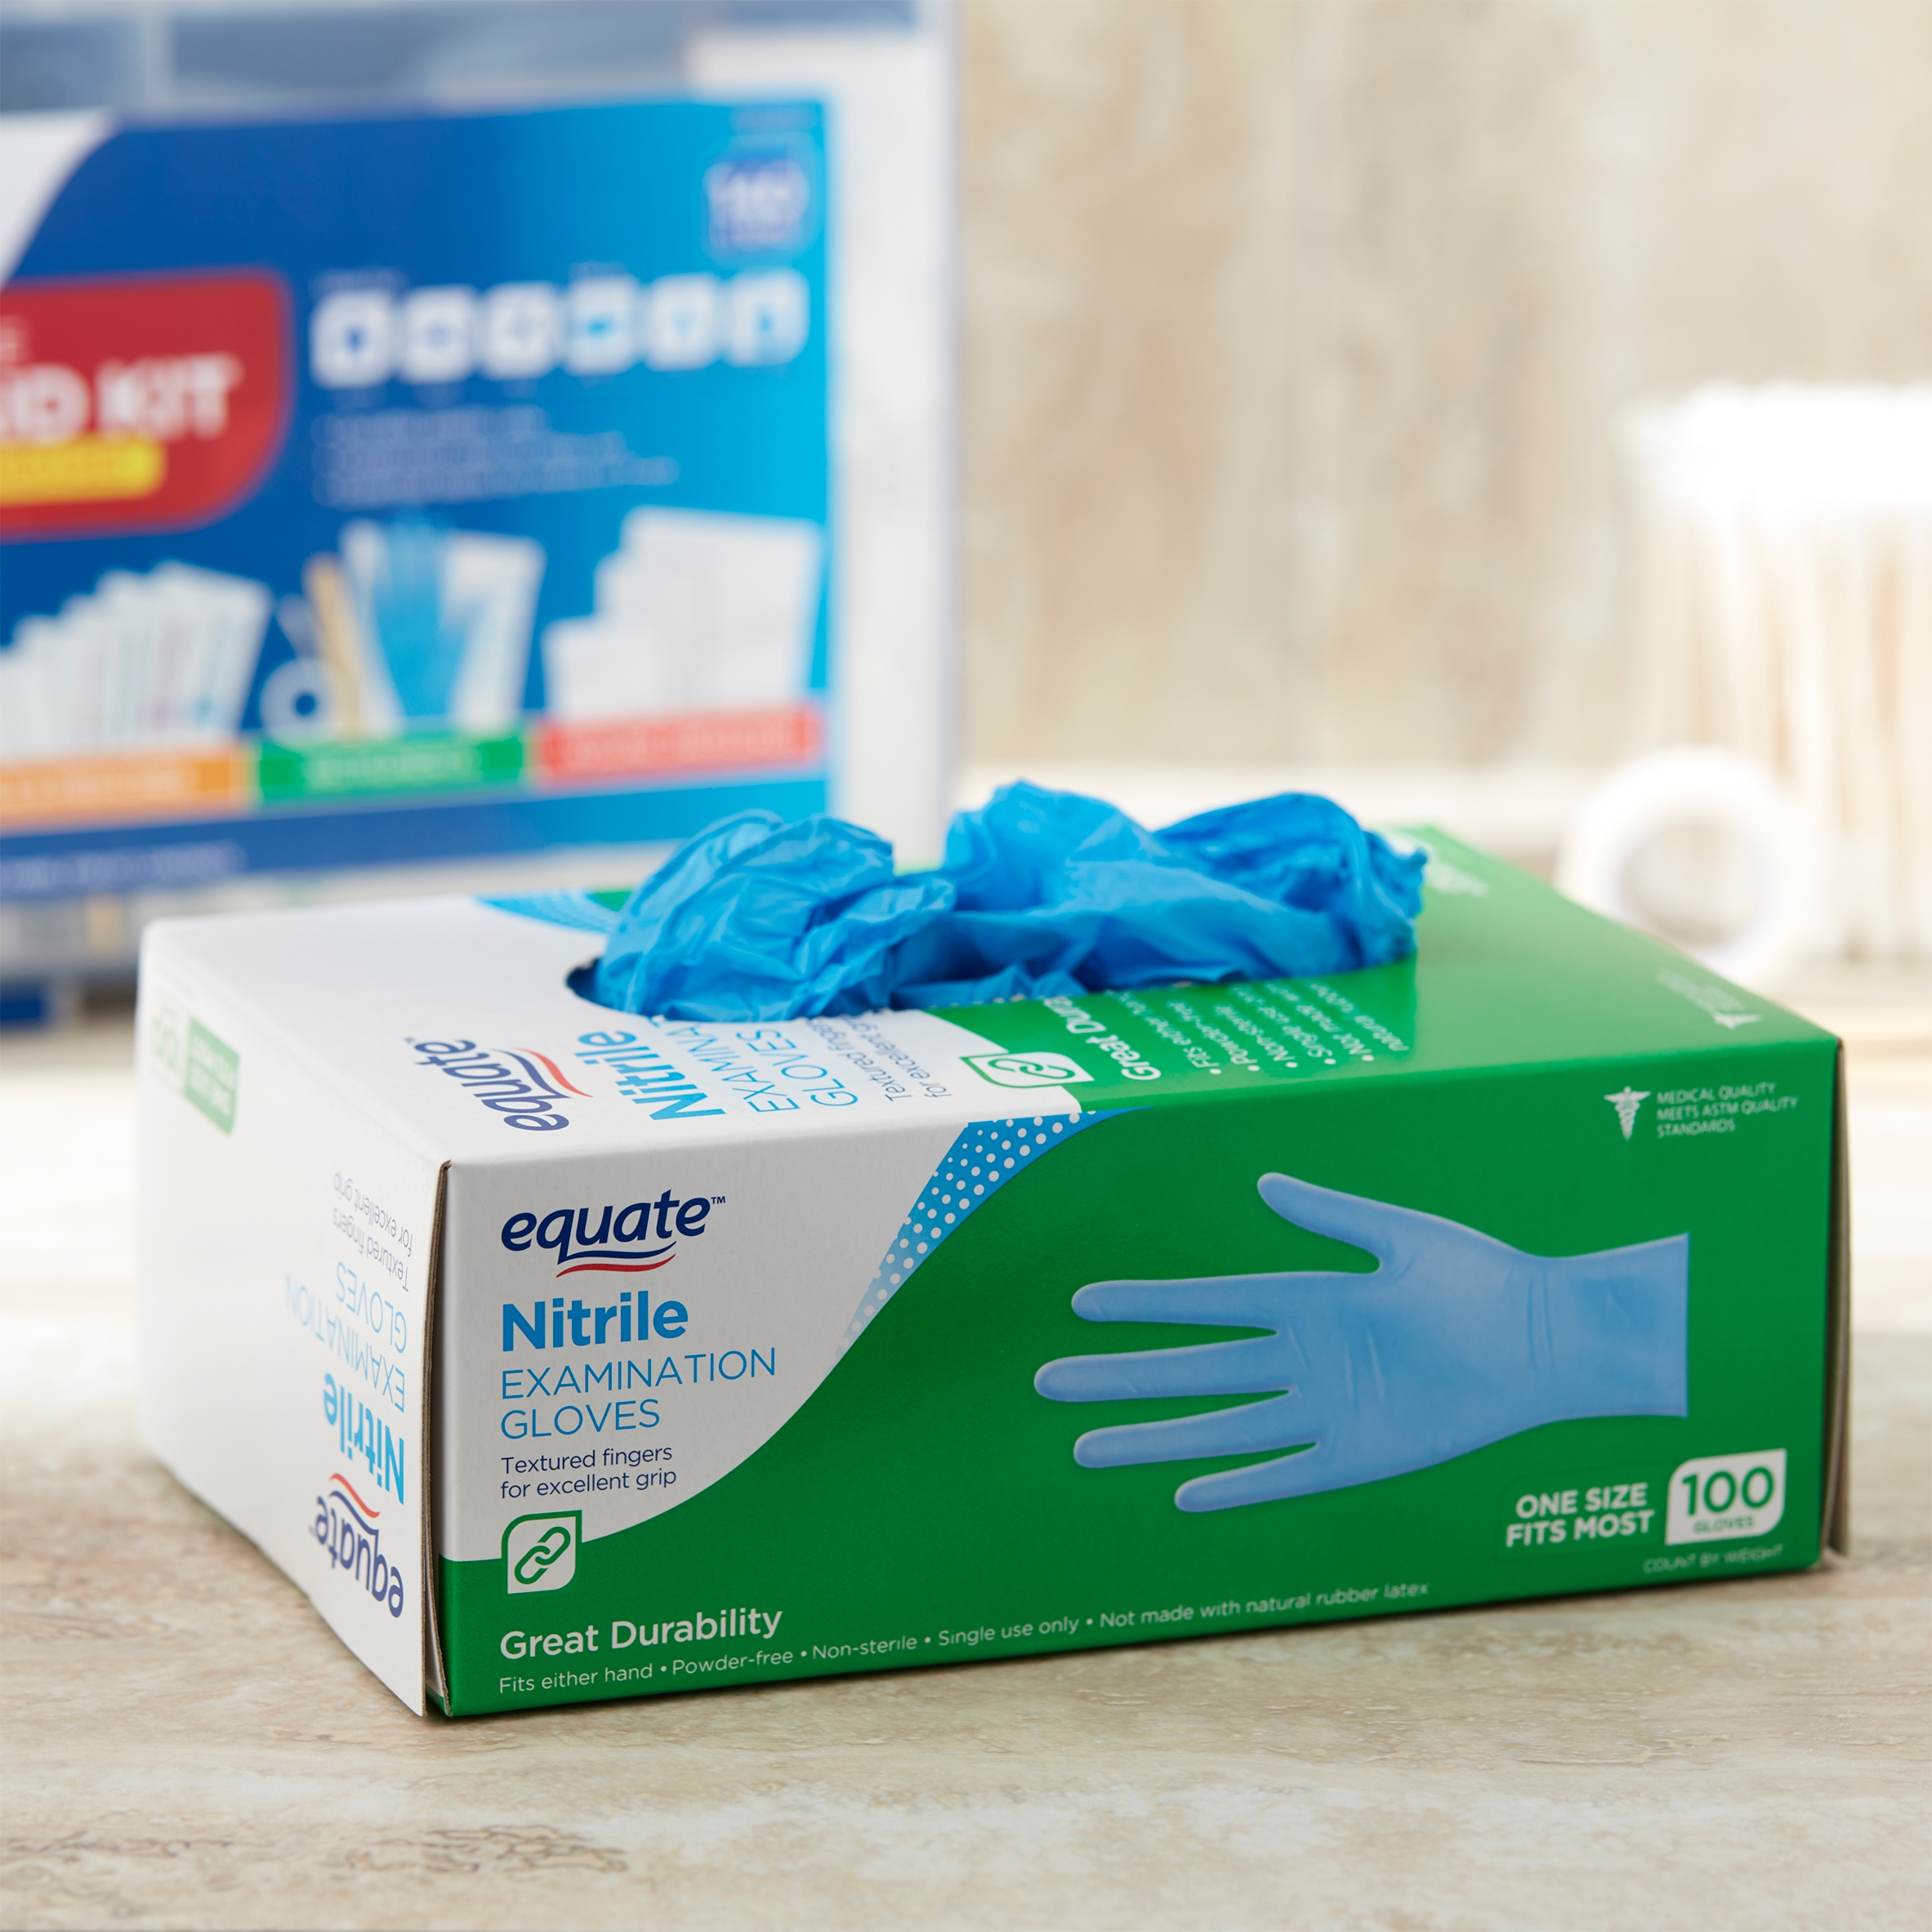 Equate Nitrile Examination Gloves, 100 count - image 2 of 10